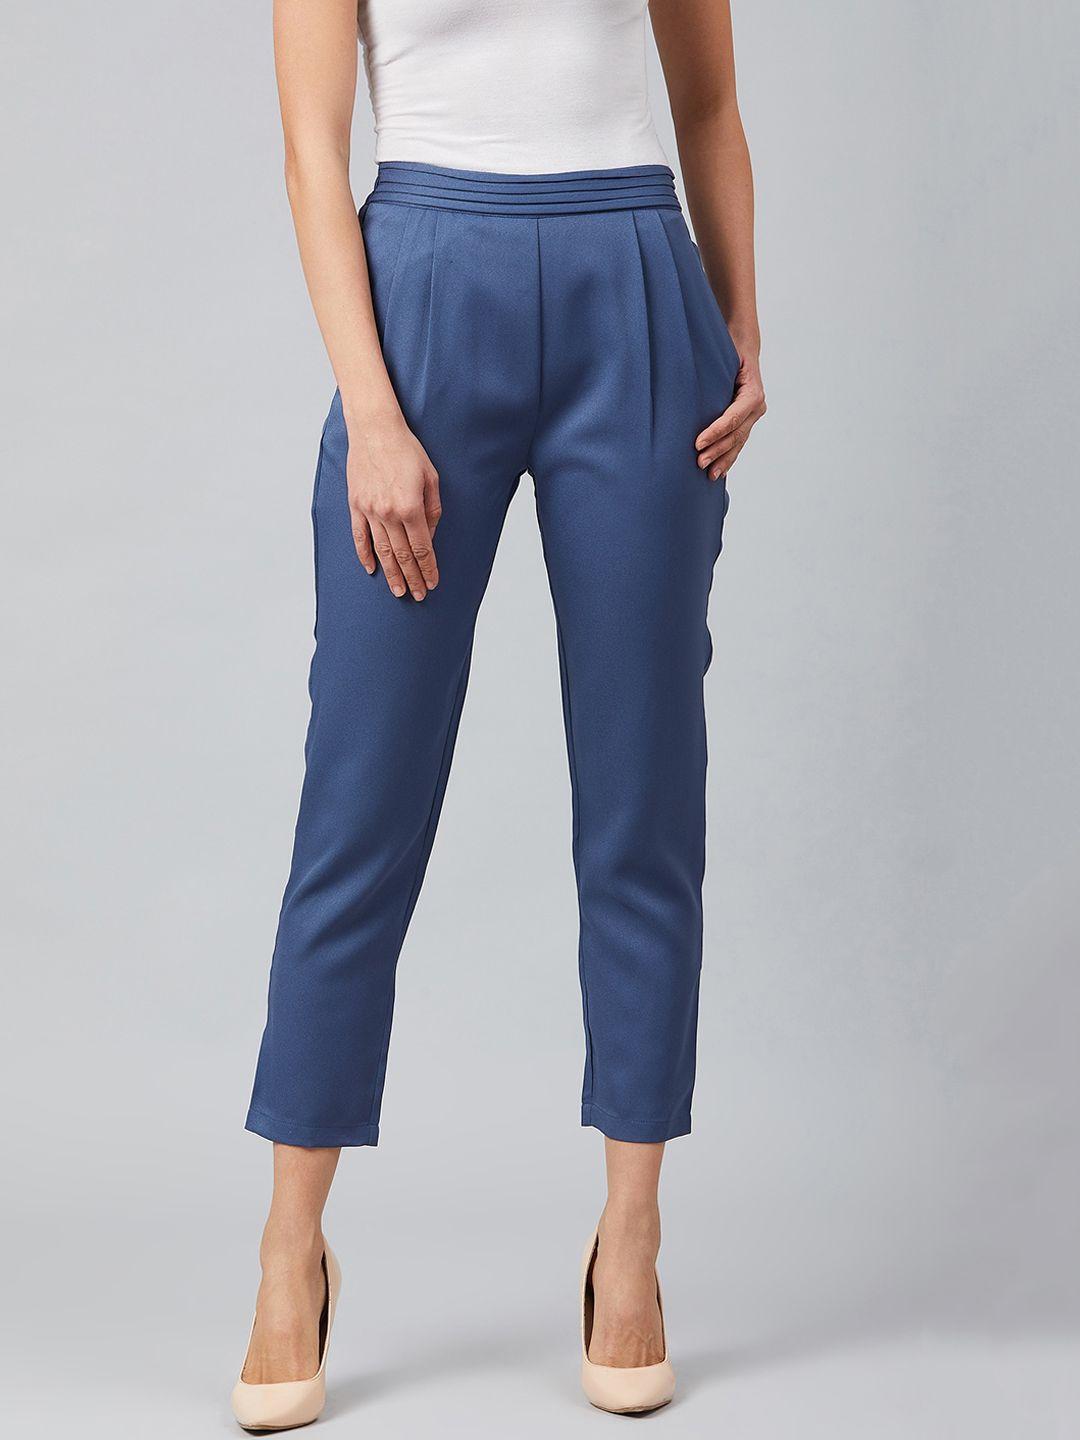 marie claire women blue regular fit solid regular trousers